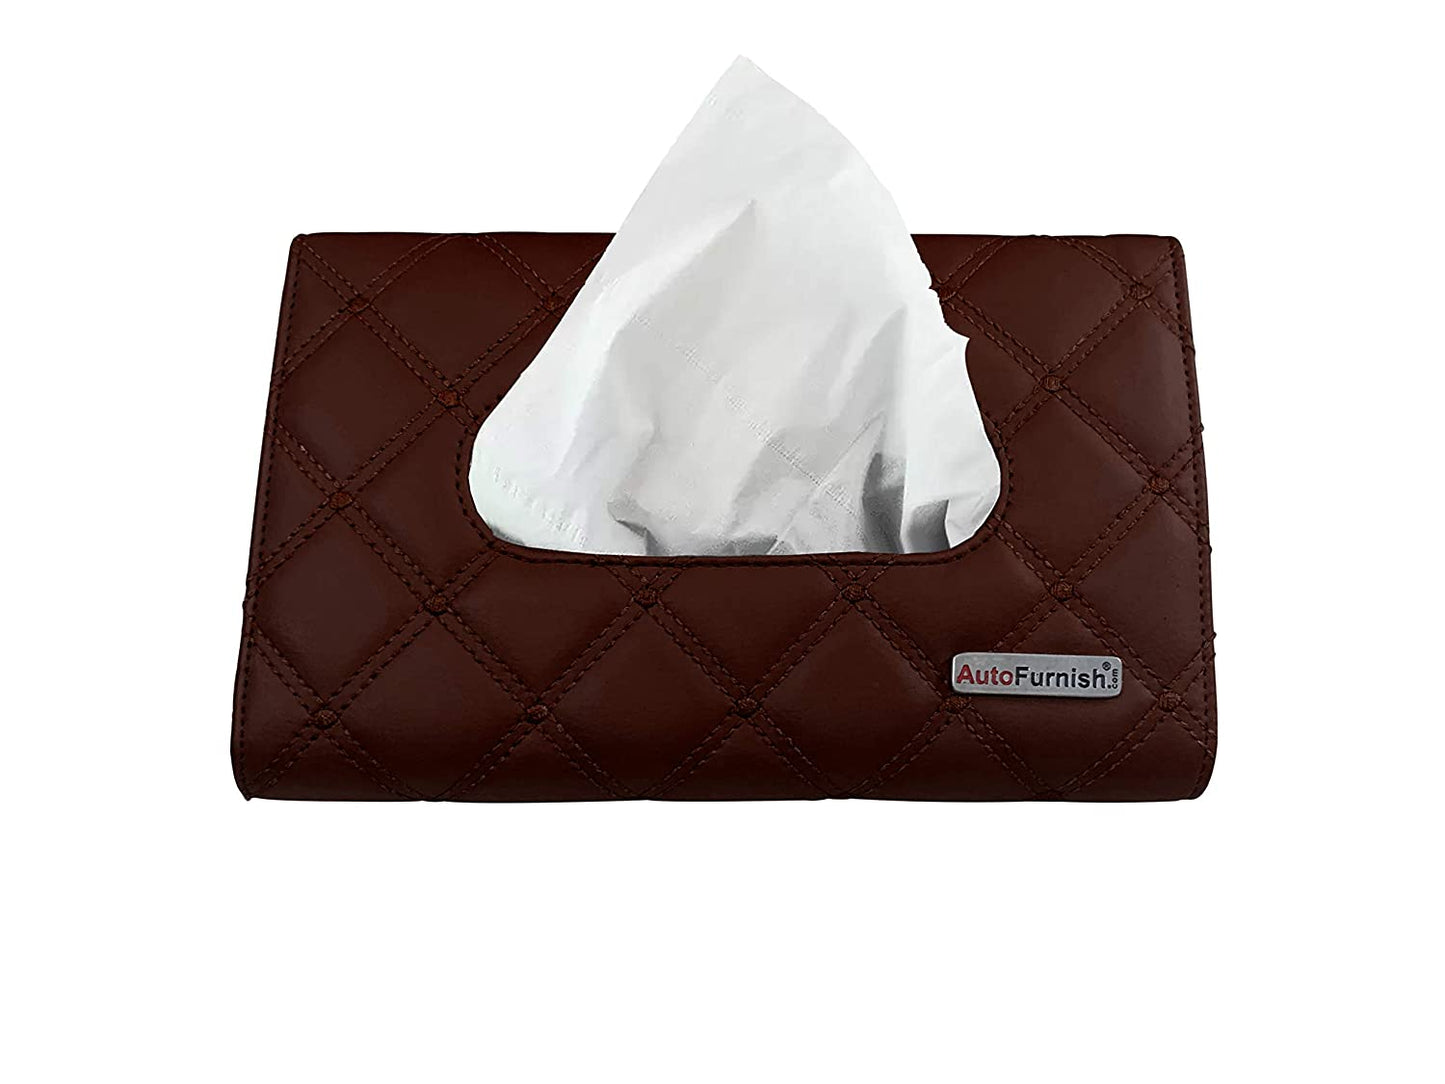 7D PREMIUM Sun Visor Tissue Box Holder | Water Resistant PU Leather with Straps and 50 Free Tissues (Set of 2)